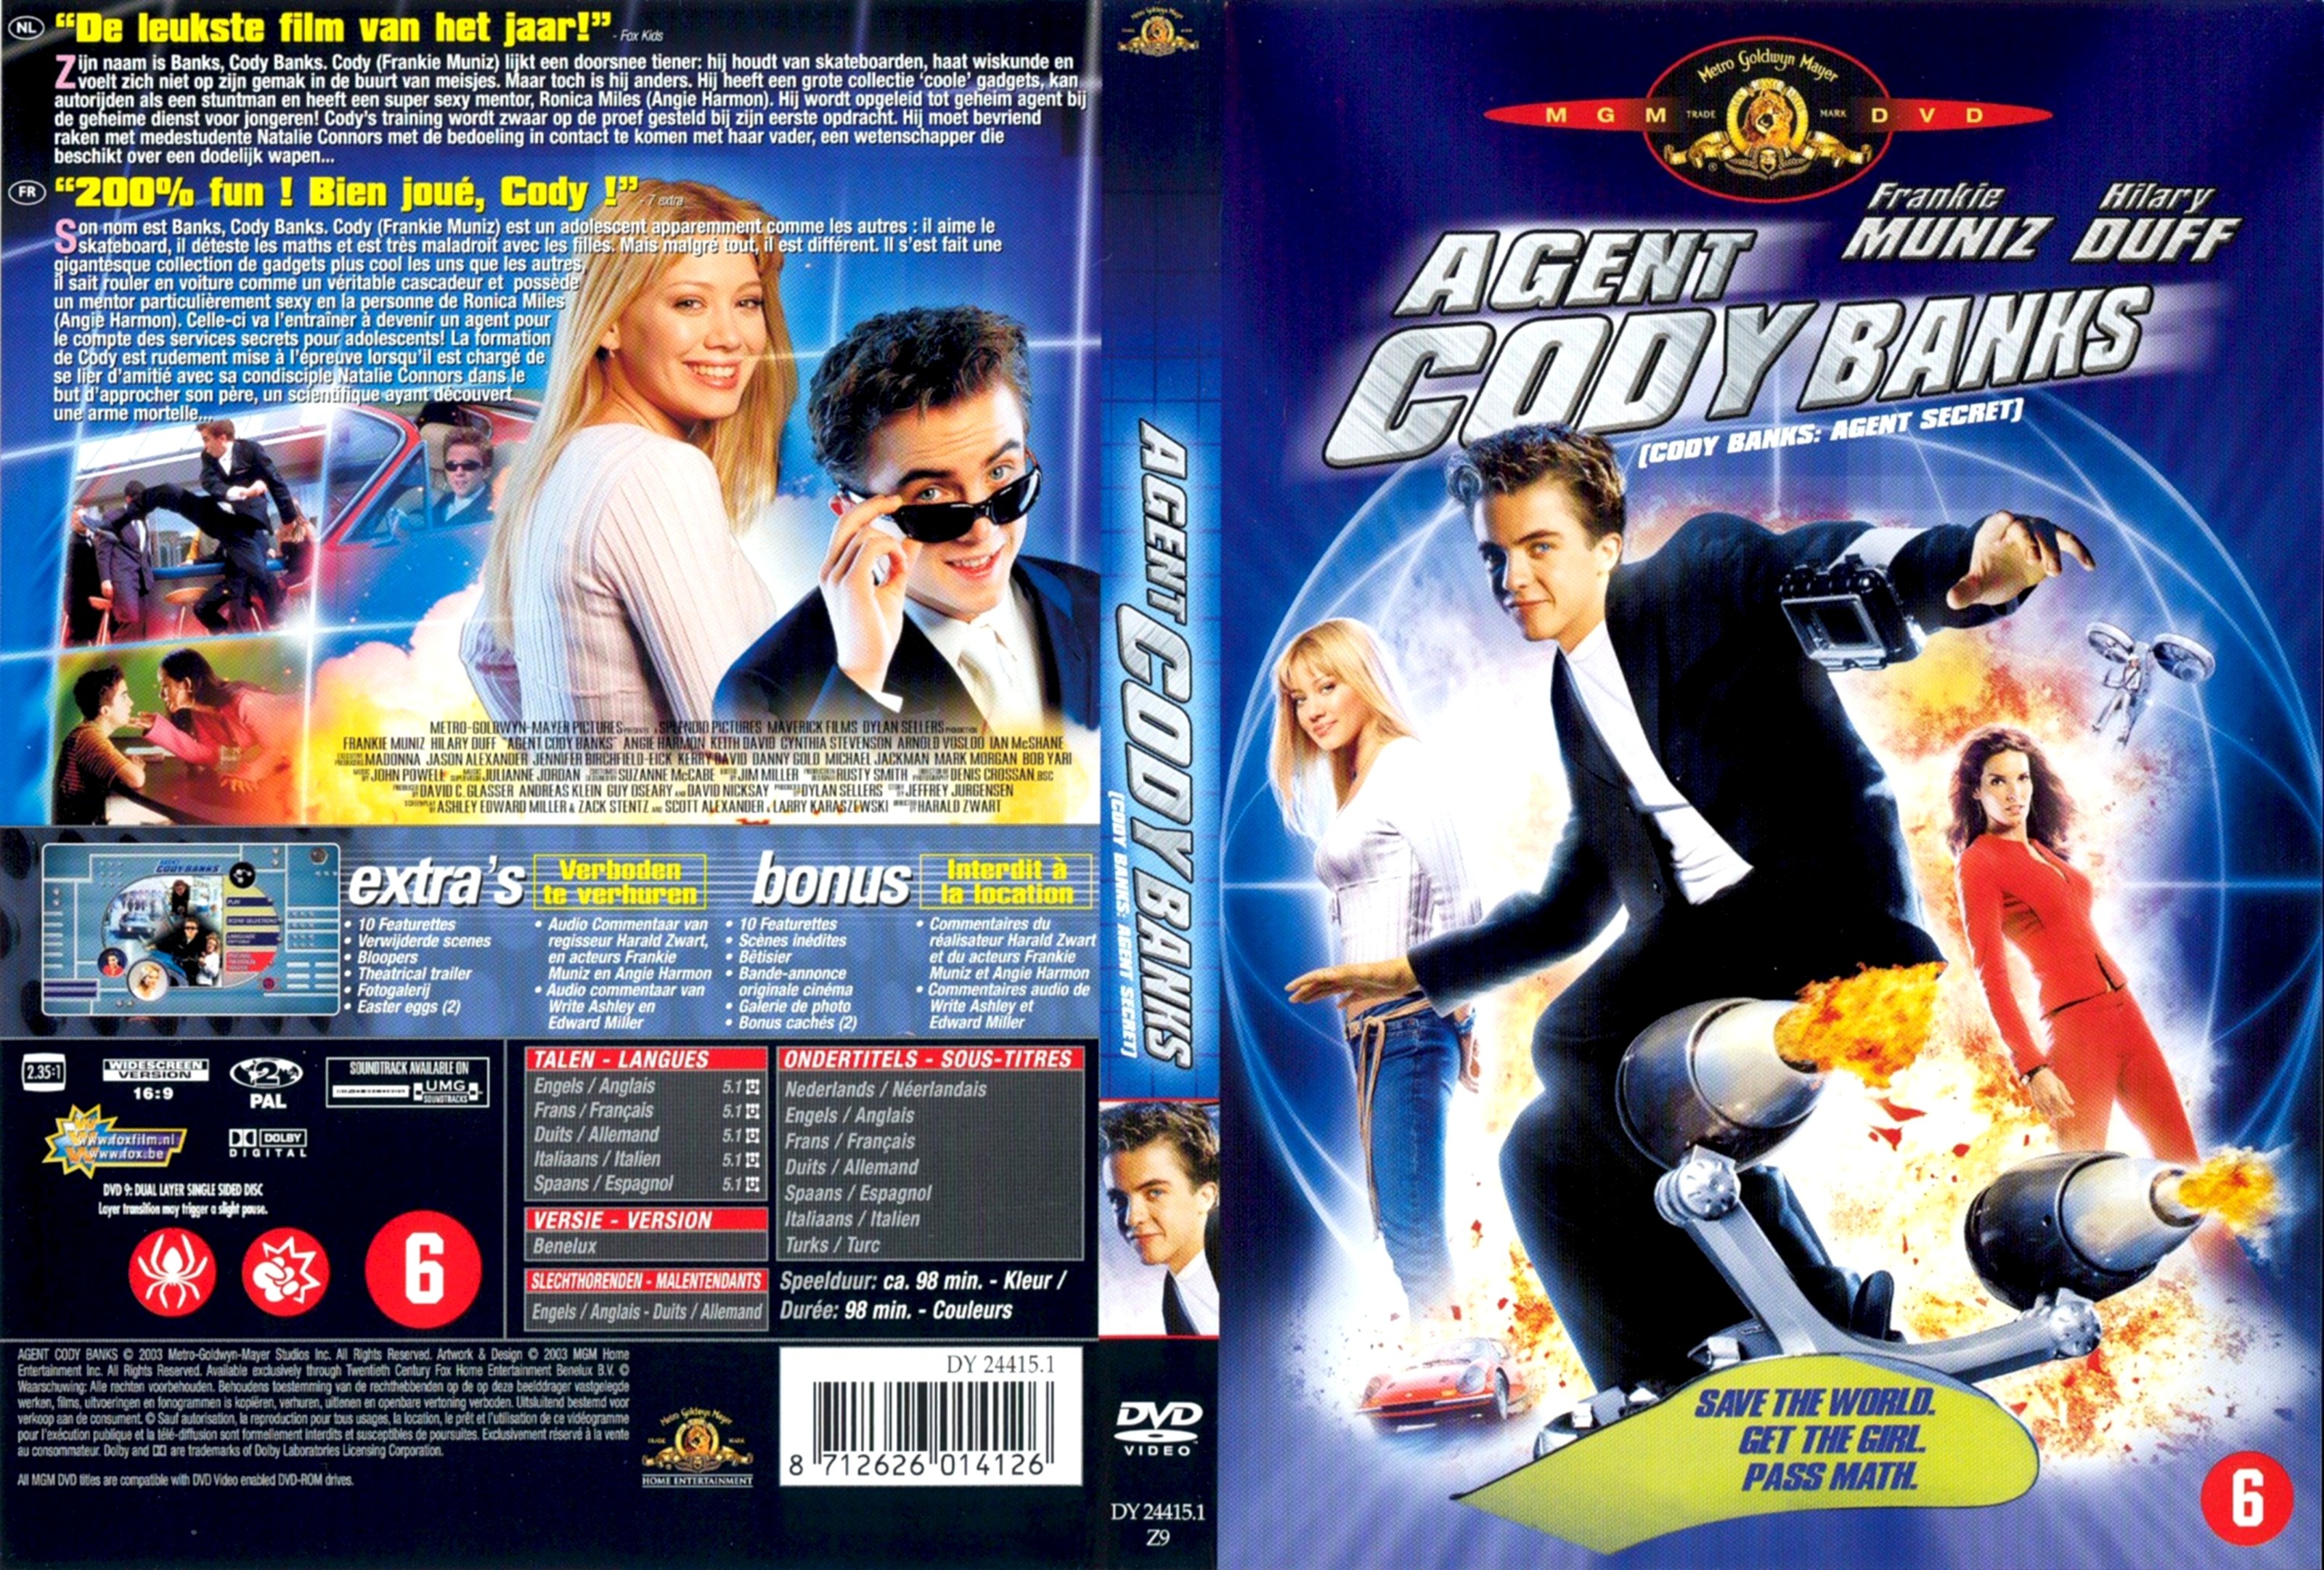 Jaquette DVD Agent cody banks